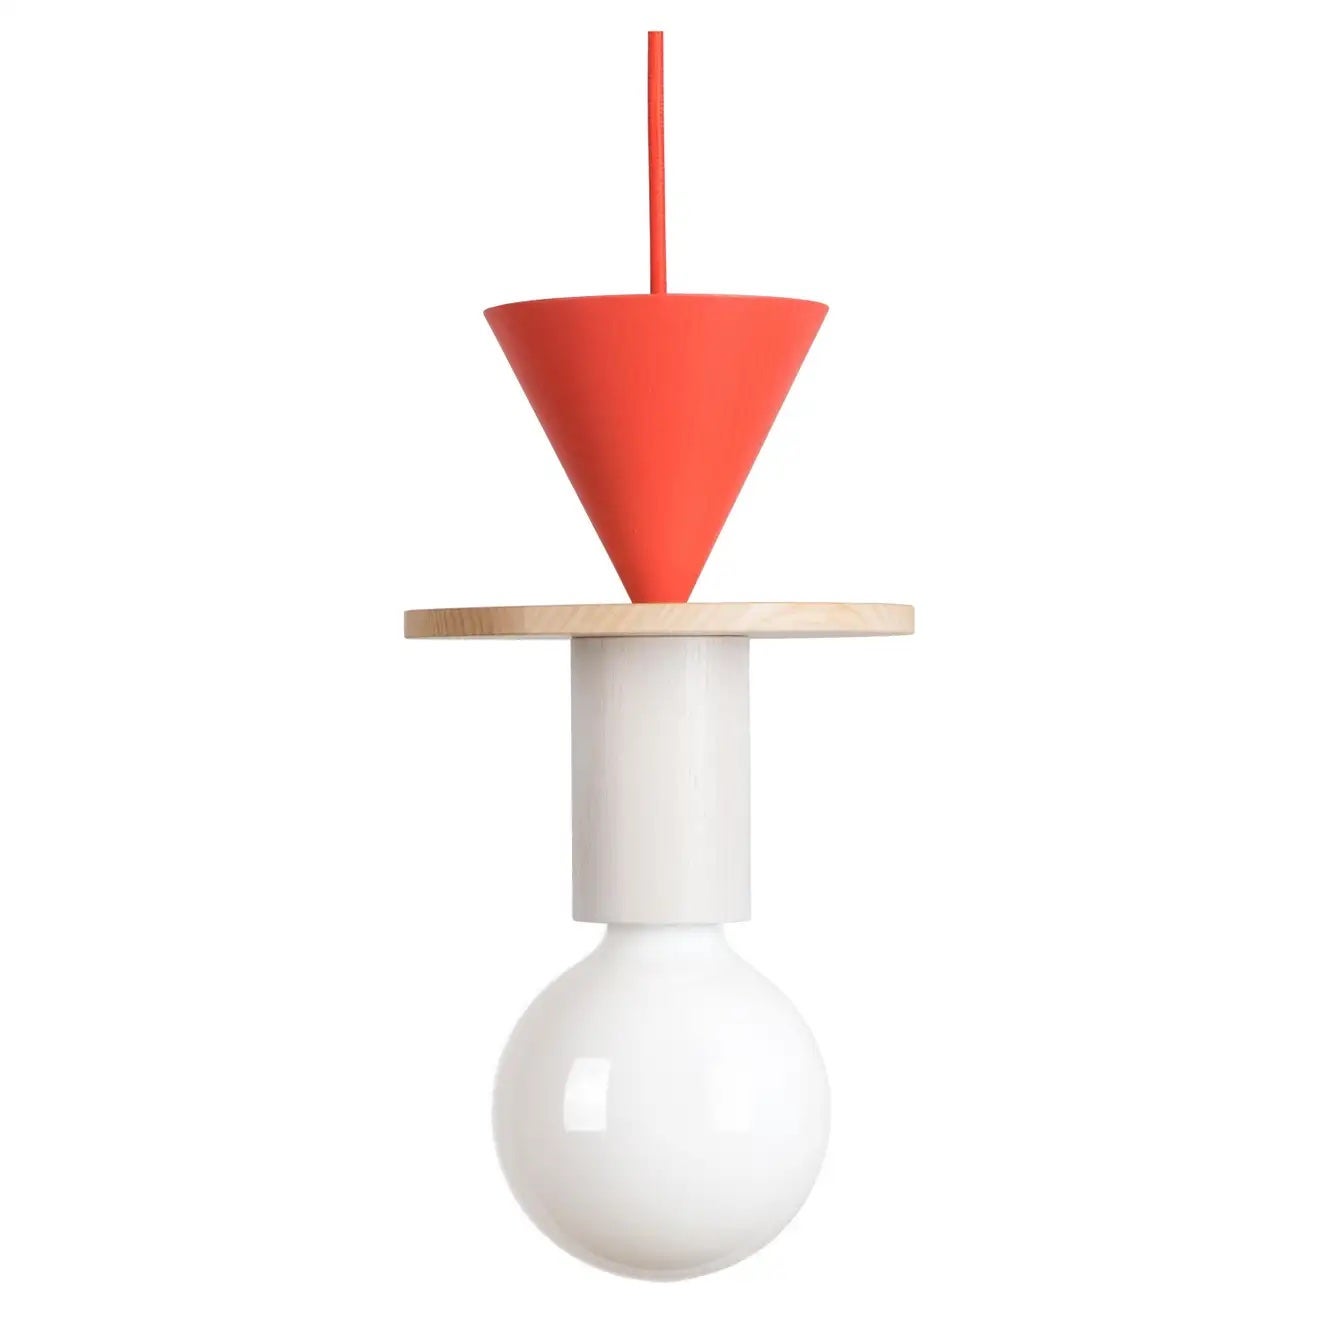 bare-bulbed pendant with red cone detail